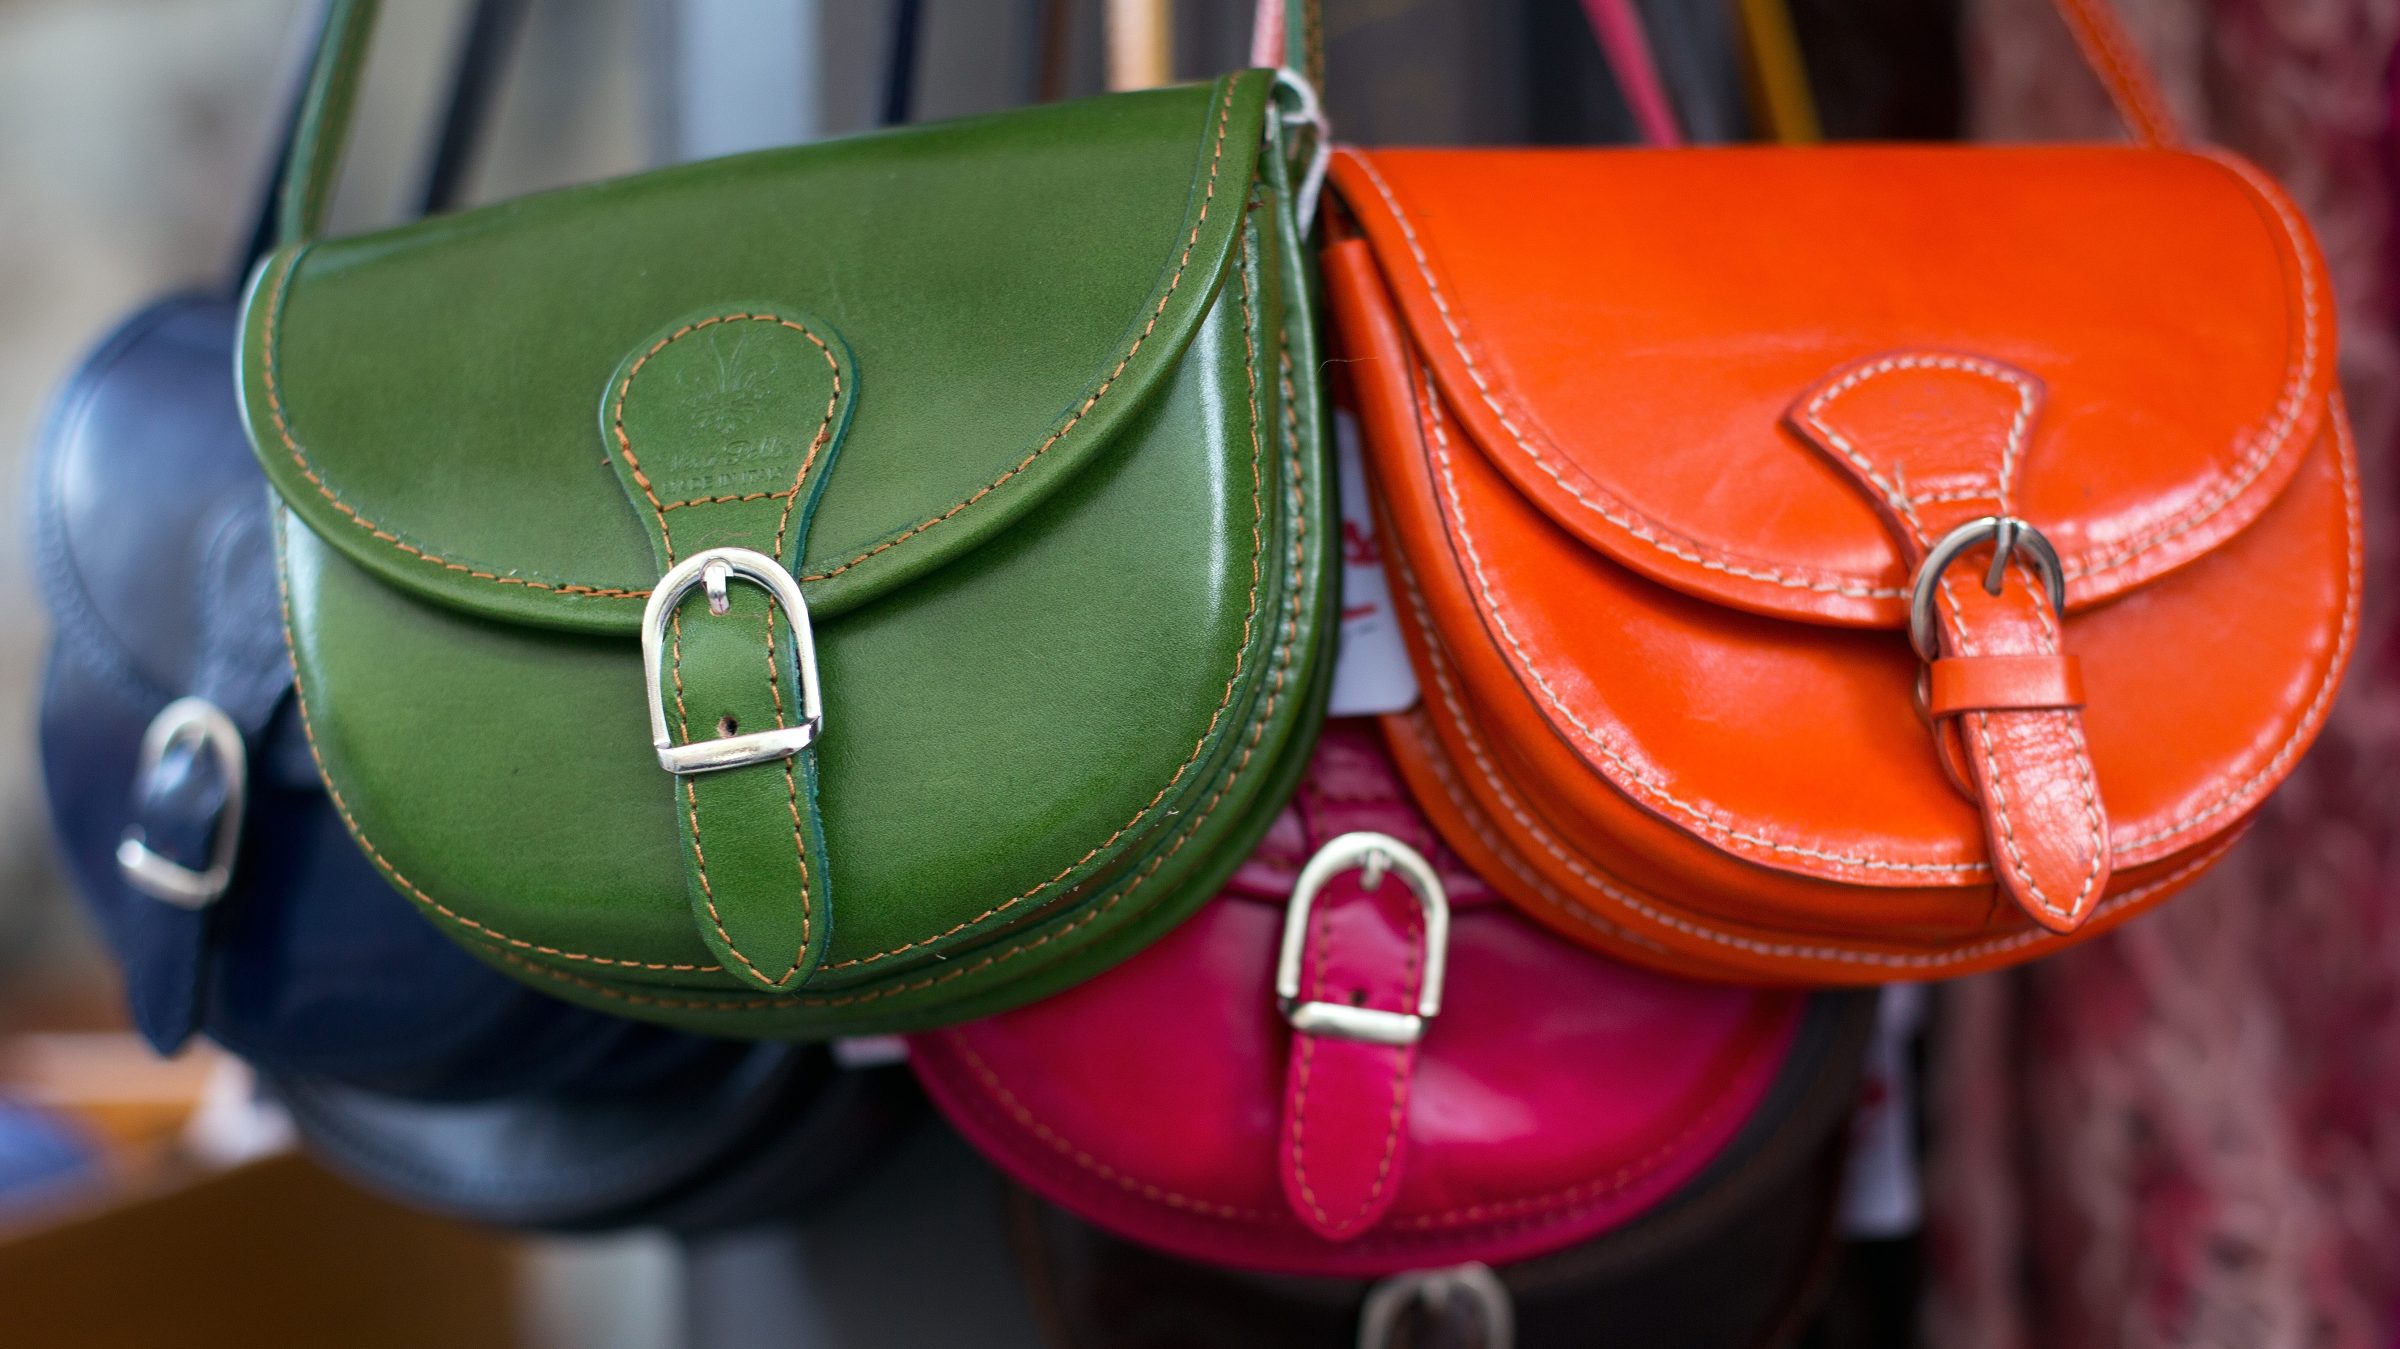 Italian-made coloured leather handbags are for sale at a shop in Berlin on December 12, 2013.